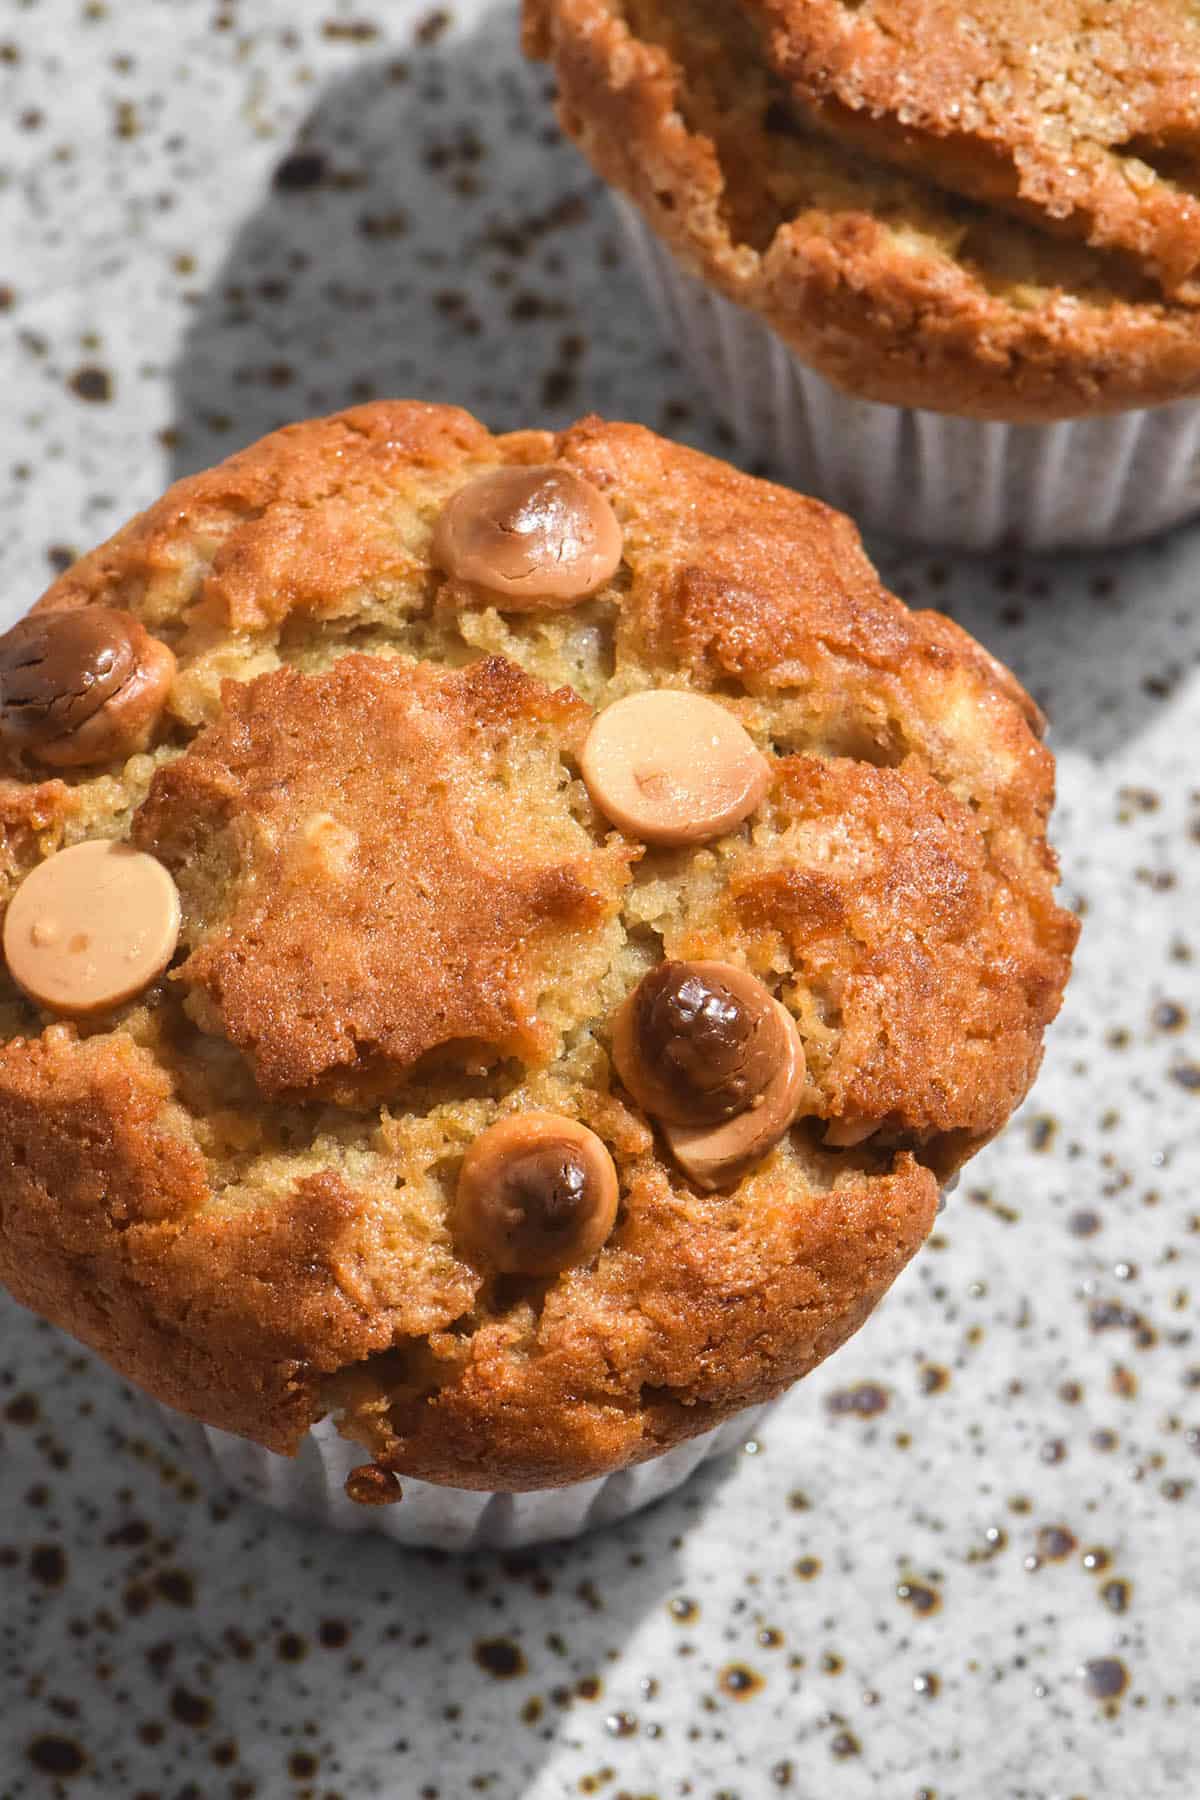 A close up macro image of two gluten free banana choc chip muffins on a white ceramic speckled plate. The muffins are golden brown and topped with either choc chips or finishing sugar. 